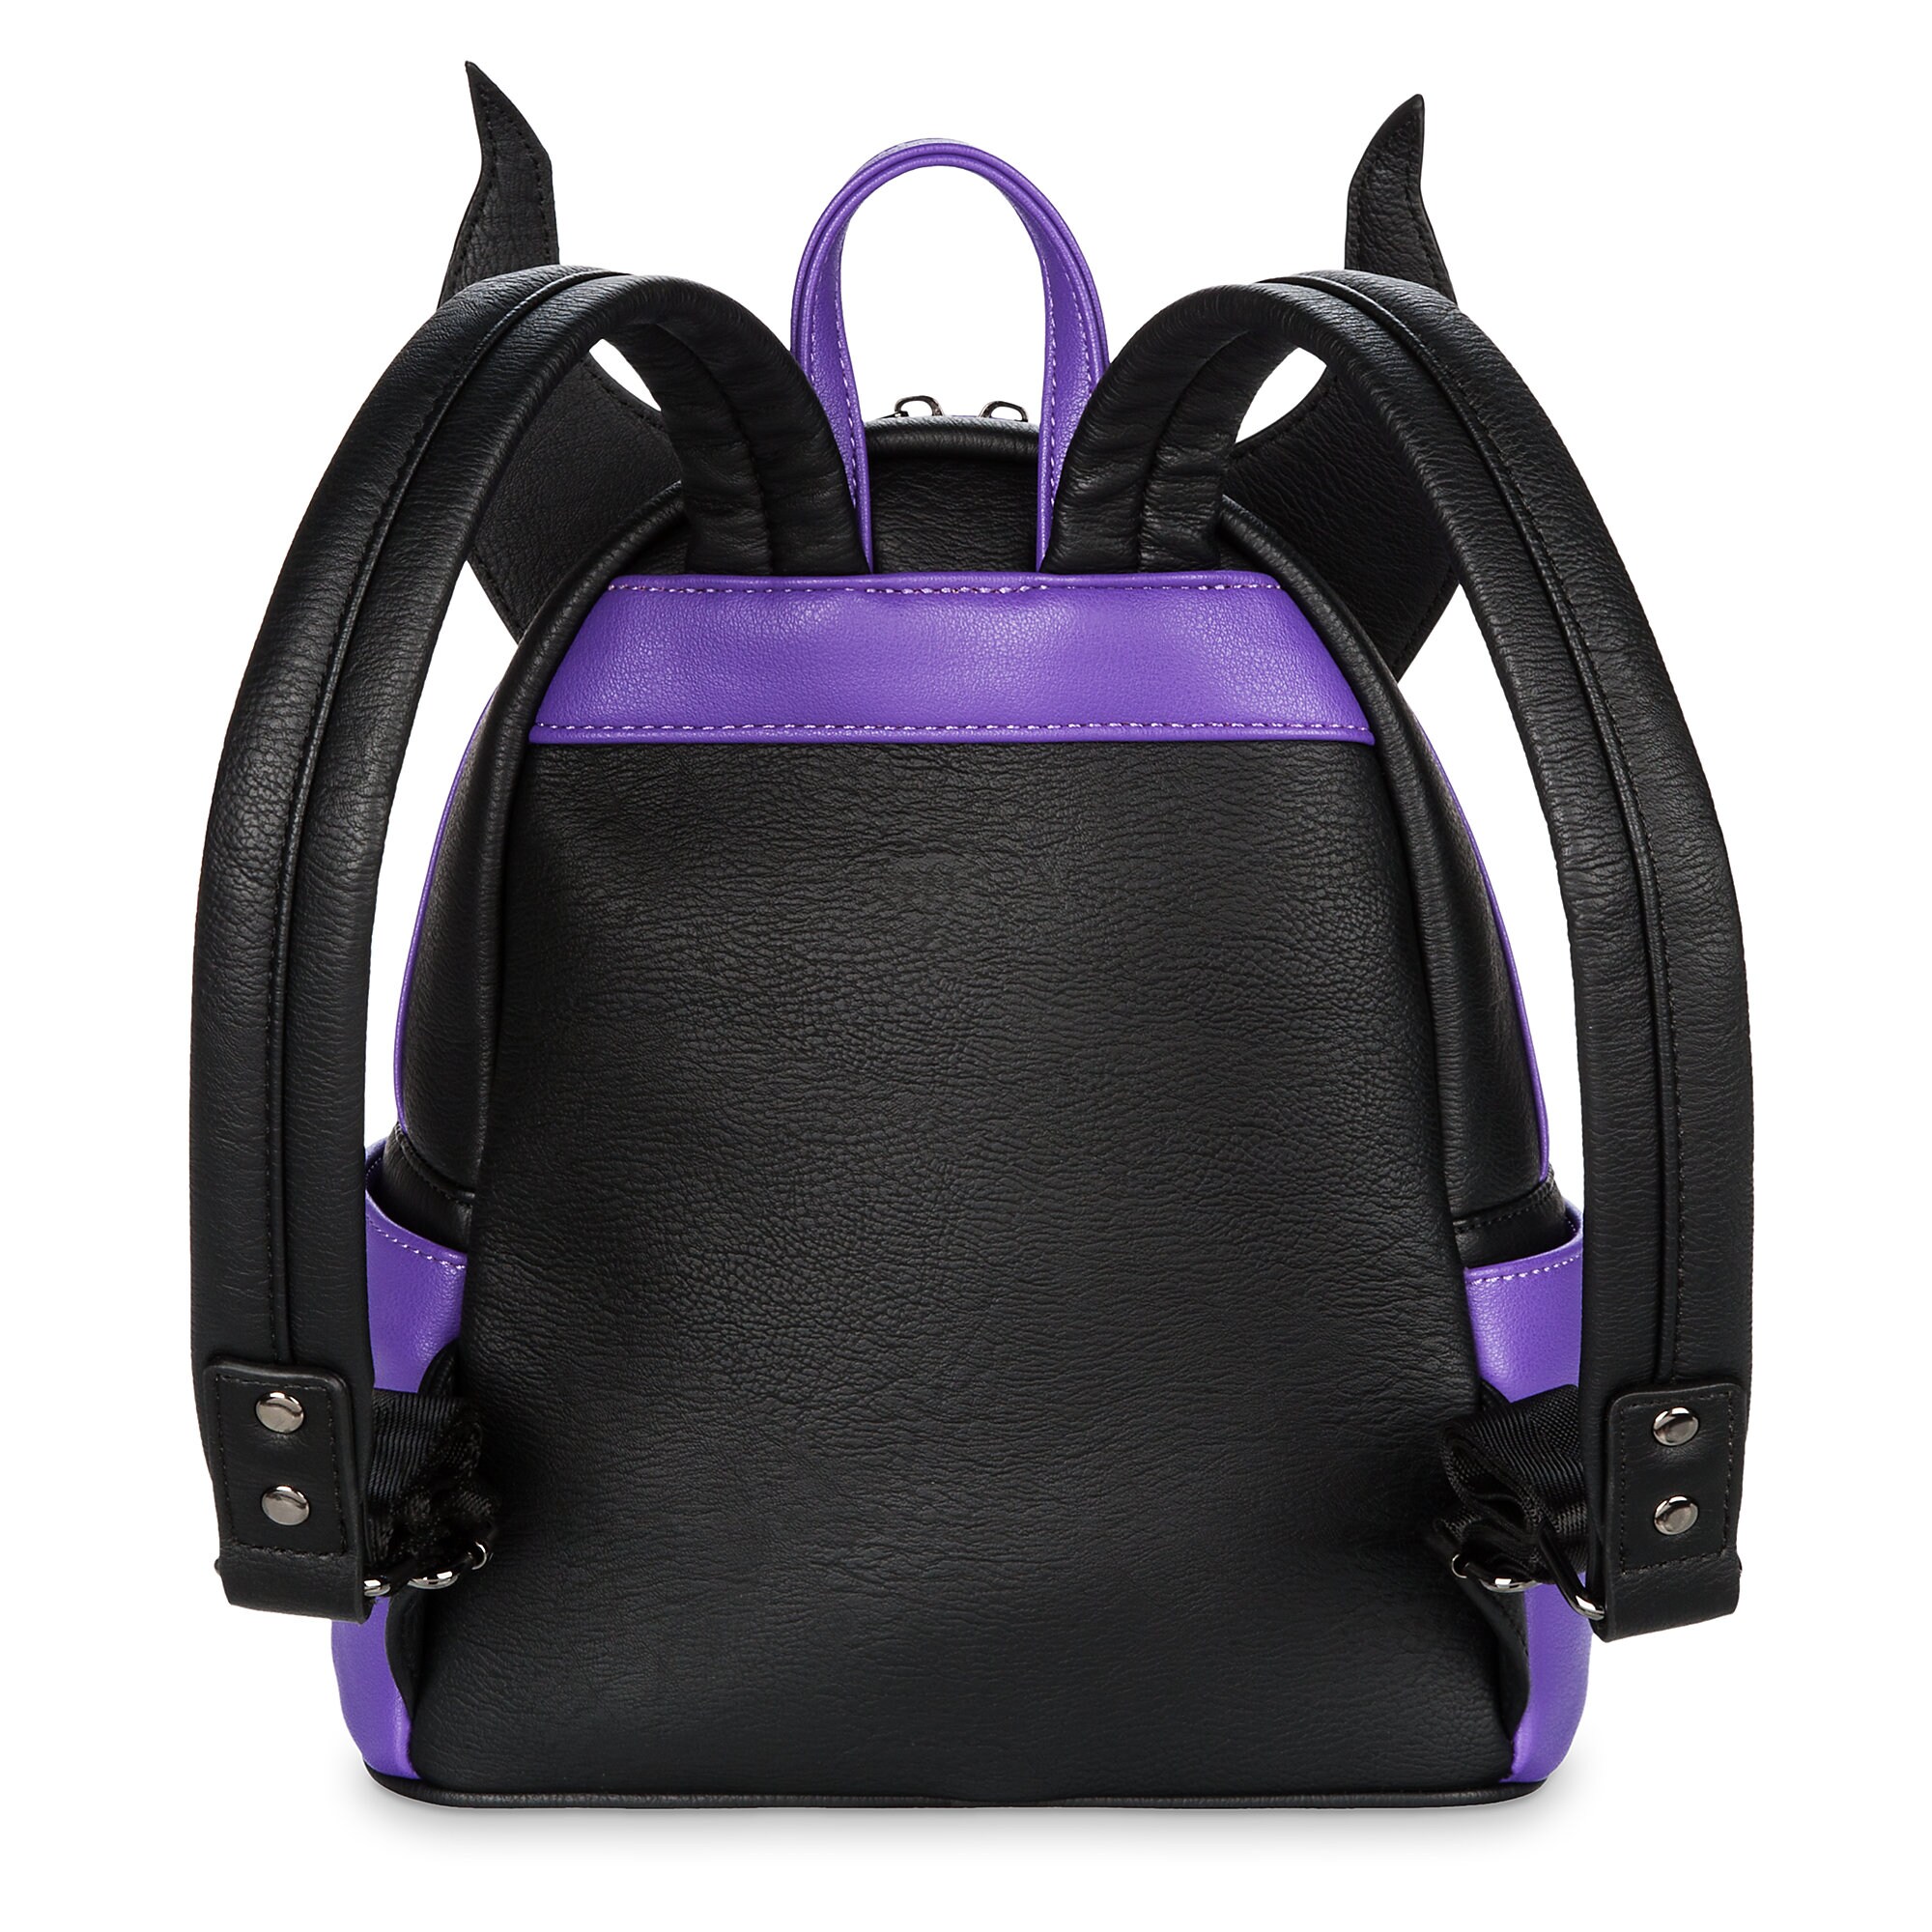 Maleficent Fashion Backpack by Loungefly